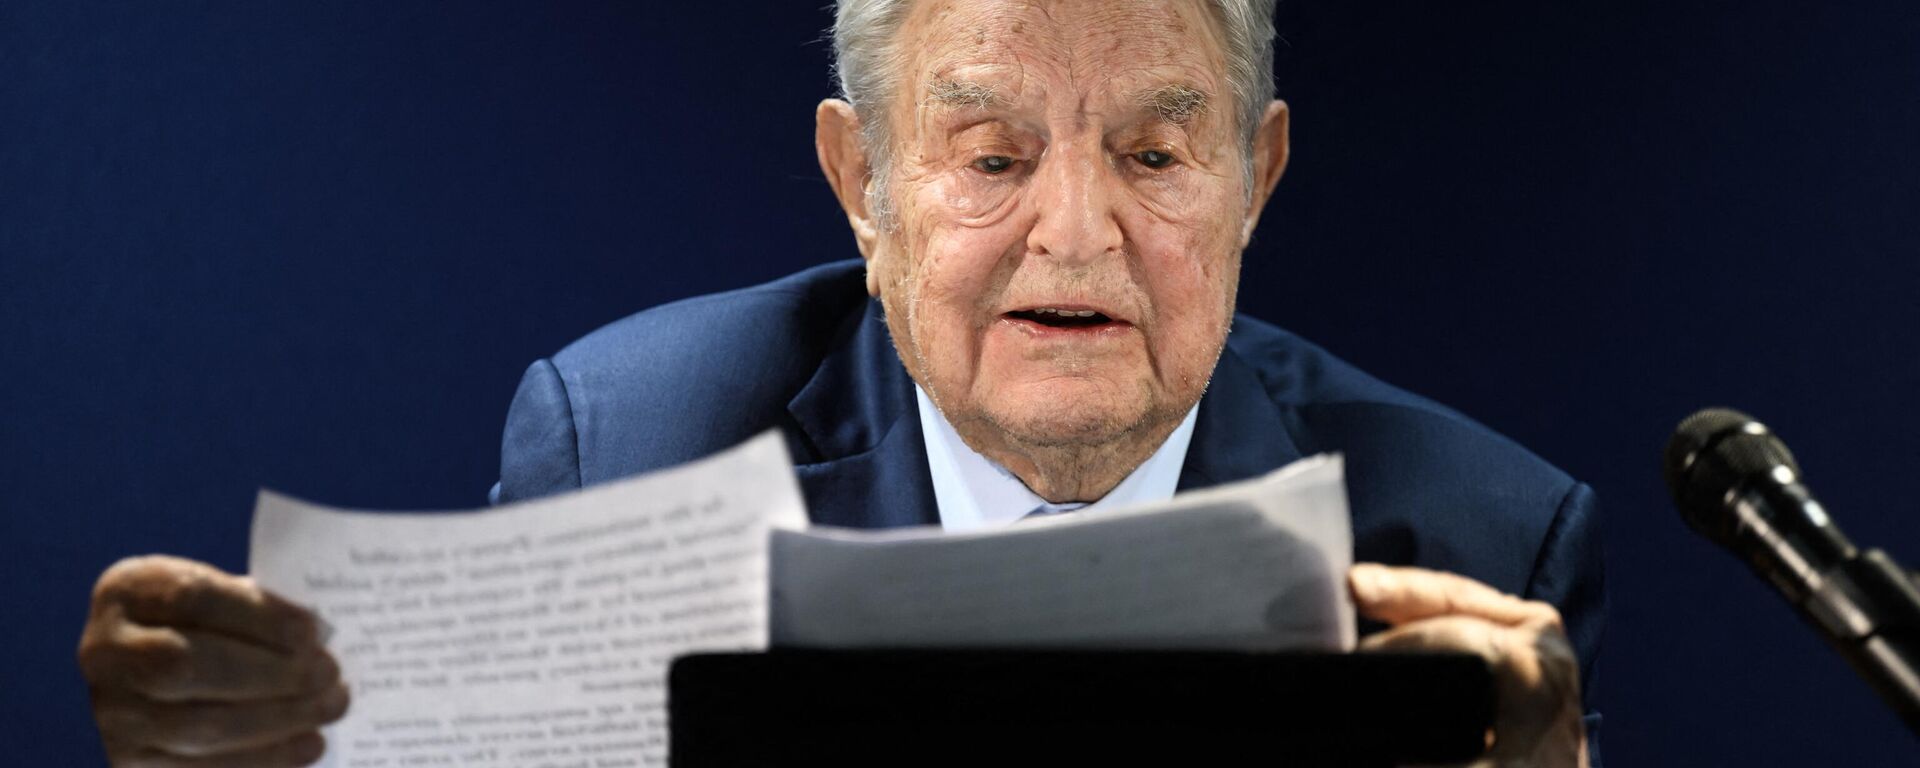 Hungarian-born US investor and philanthropist George Soros addresses the assembly on the sidelines of the World Economic Forum (WEF) annual meeting in Davos on May 24, 2022 - Sputnik International, 1920, 01.04.2023